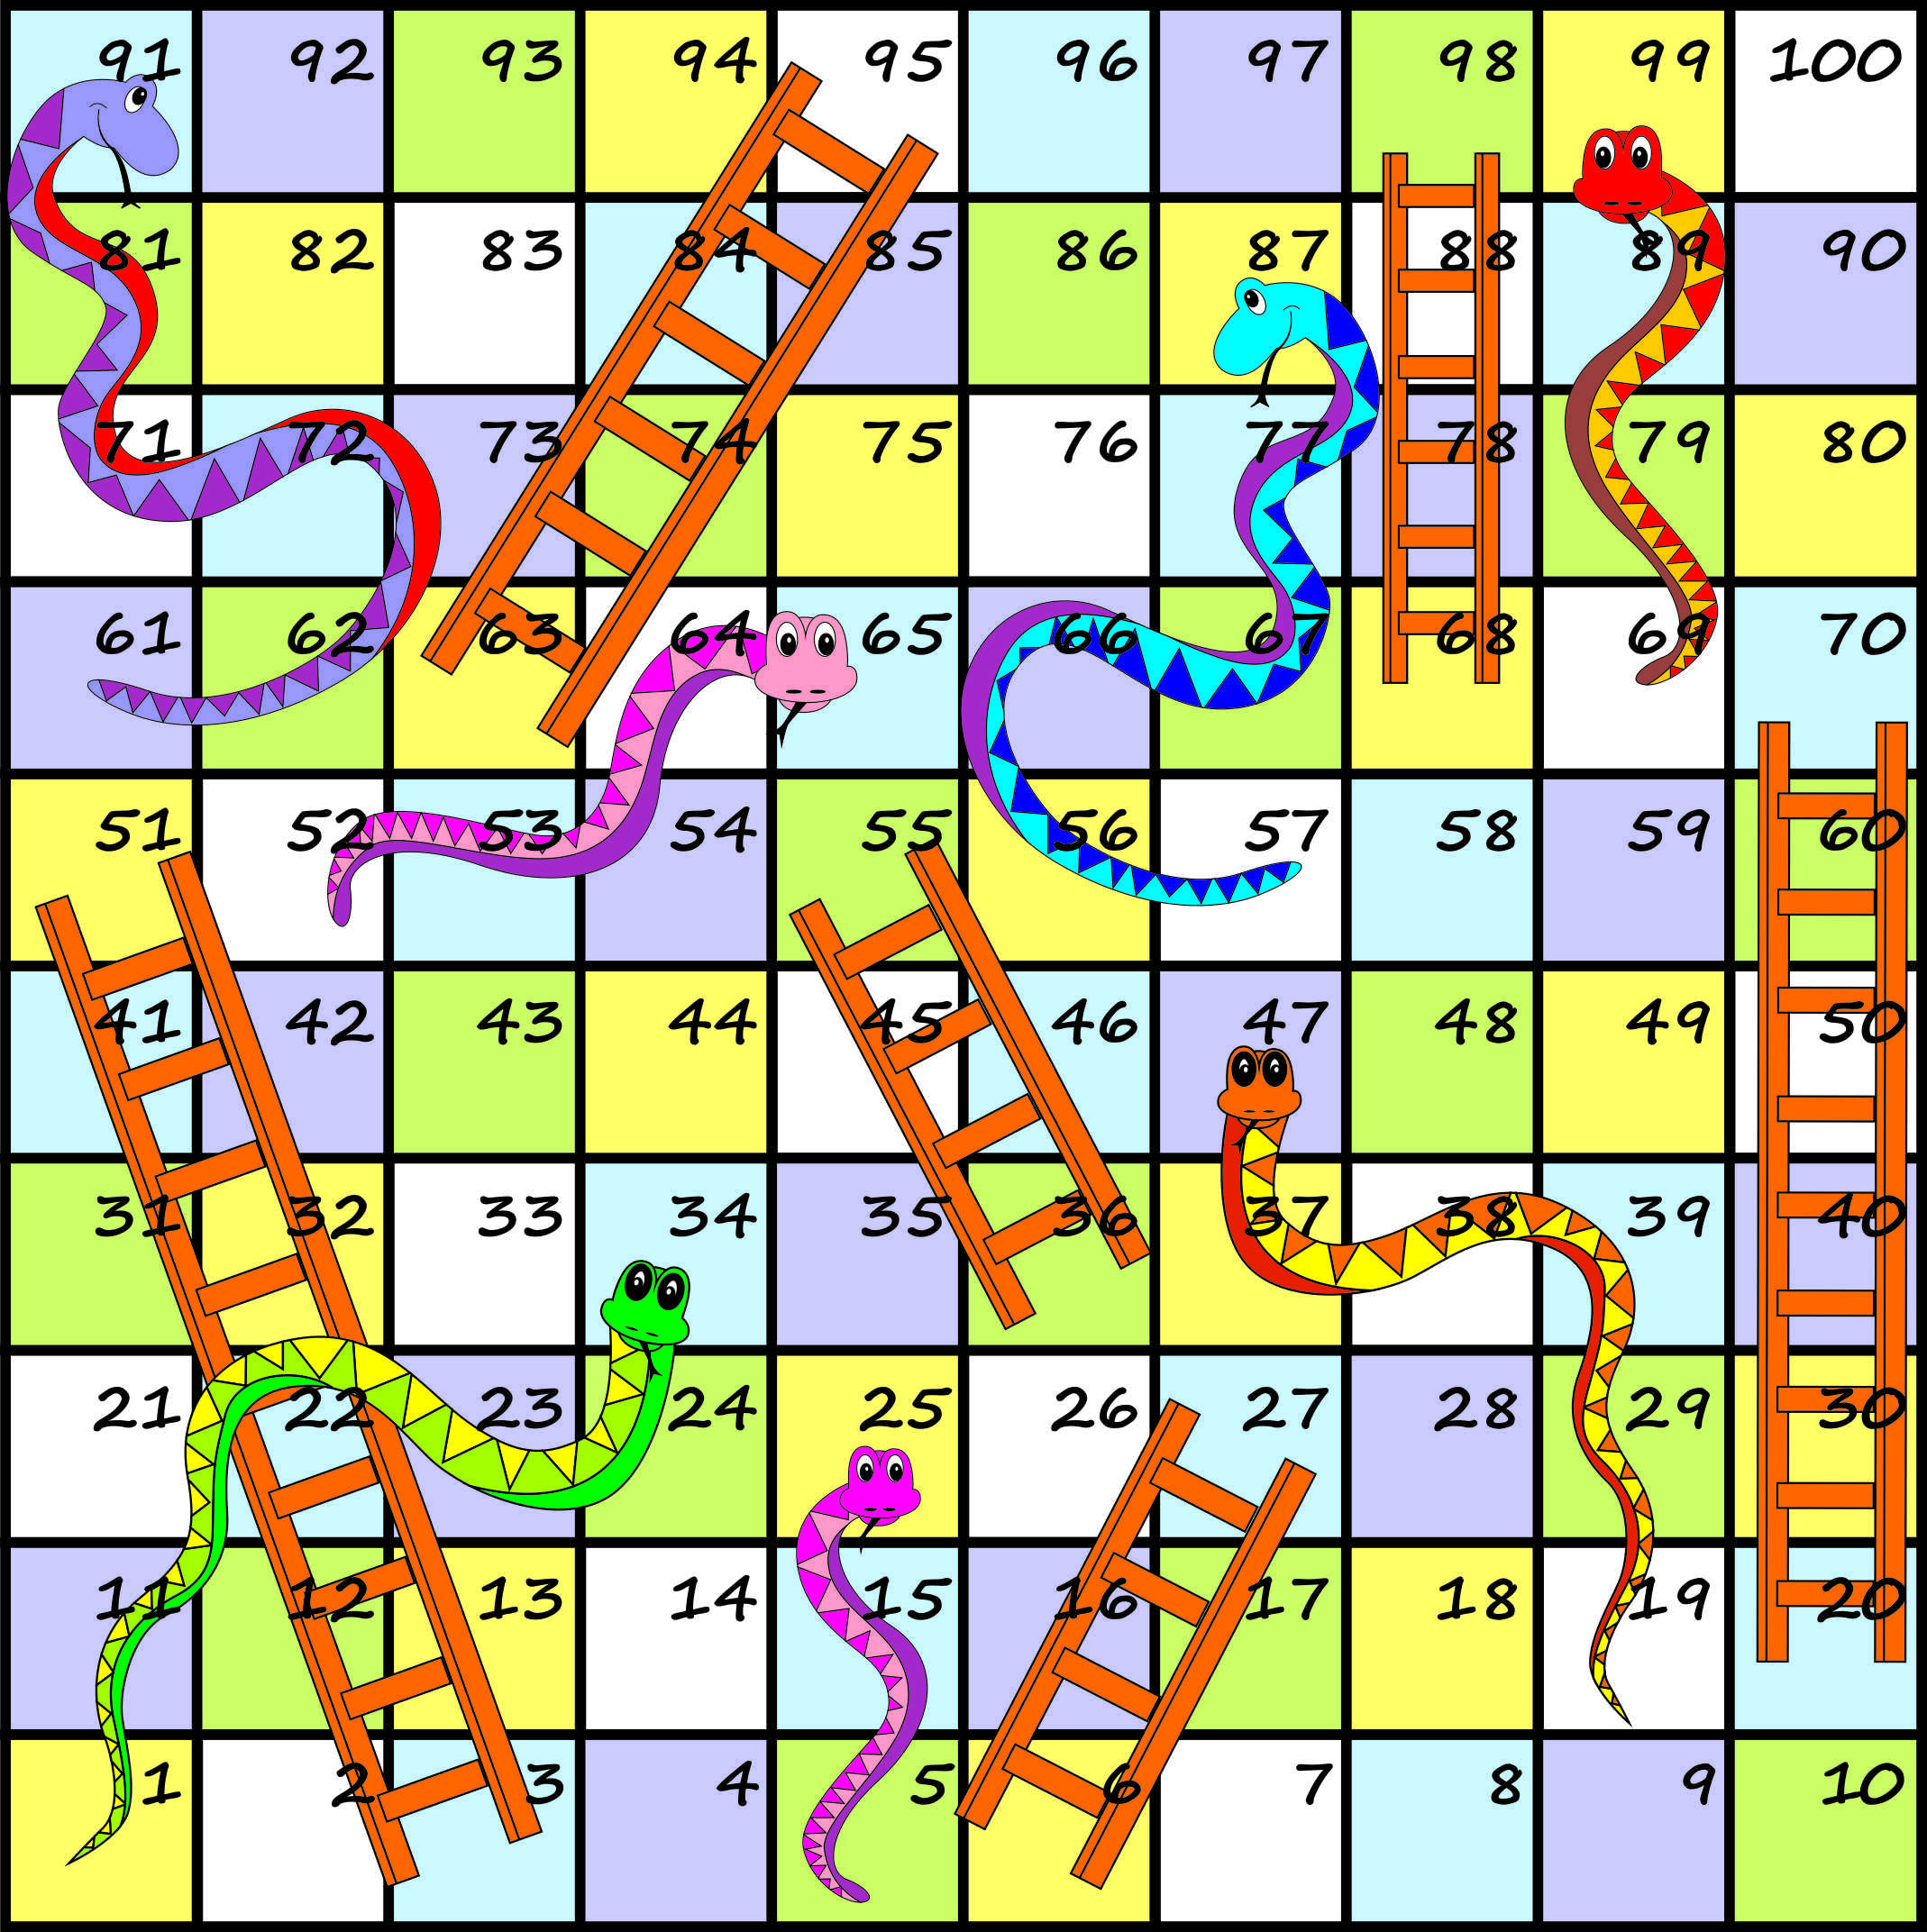 Snakes ladder ballcrusher instructions with free porn photo